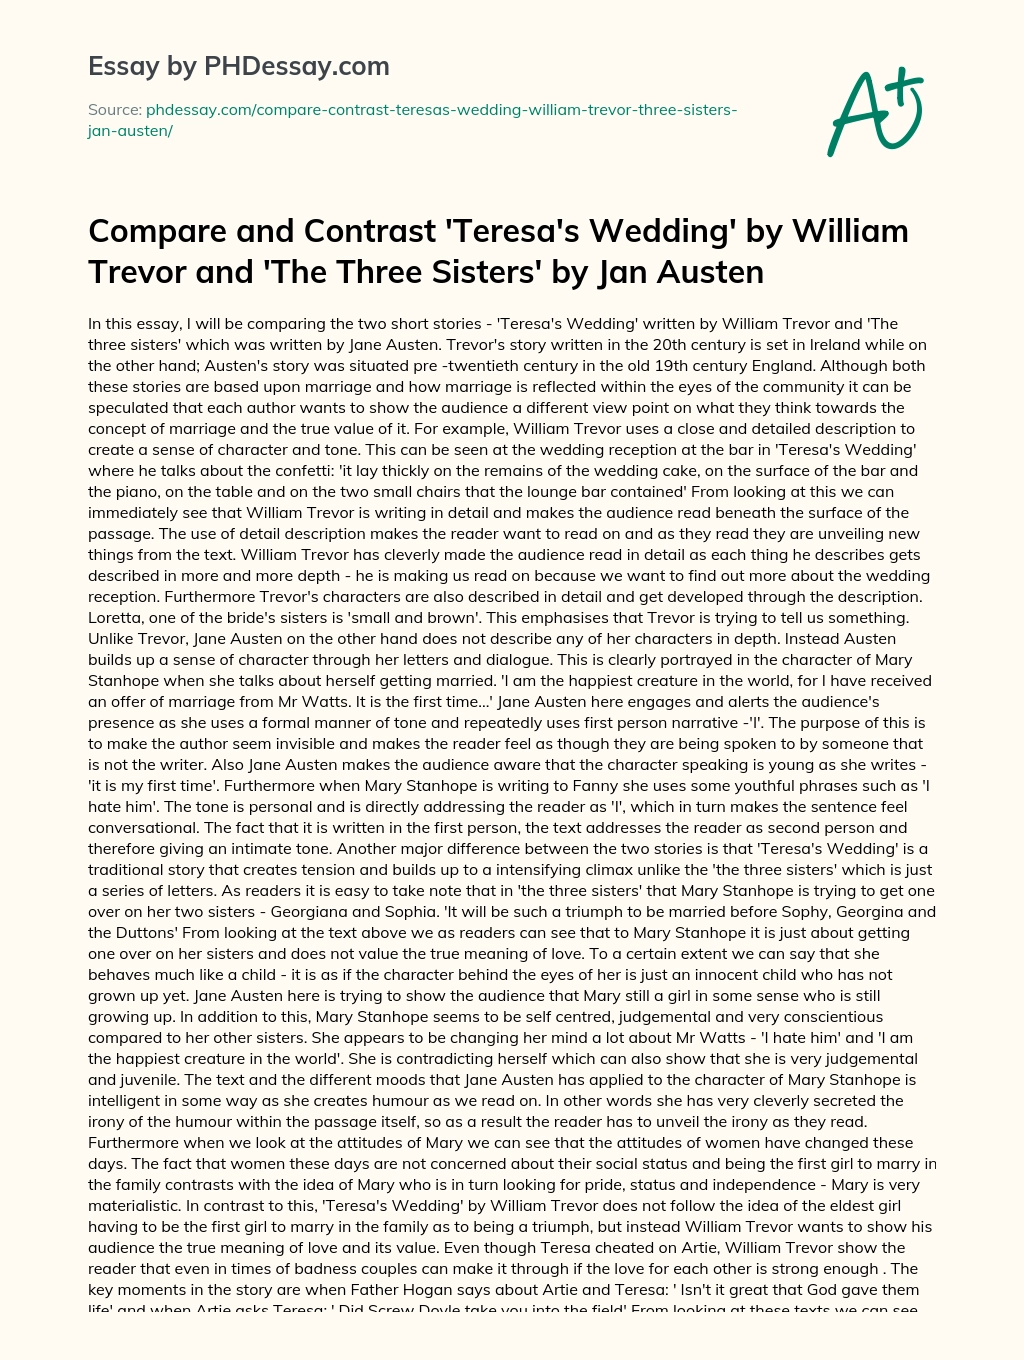 Compare and Contrast ‘Teresa’s Wedding’ by William Trevor and ‘The Three Sisters’ by Jan Austen essay